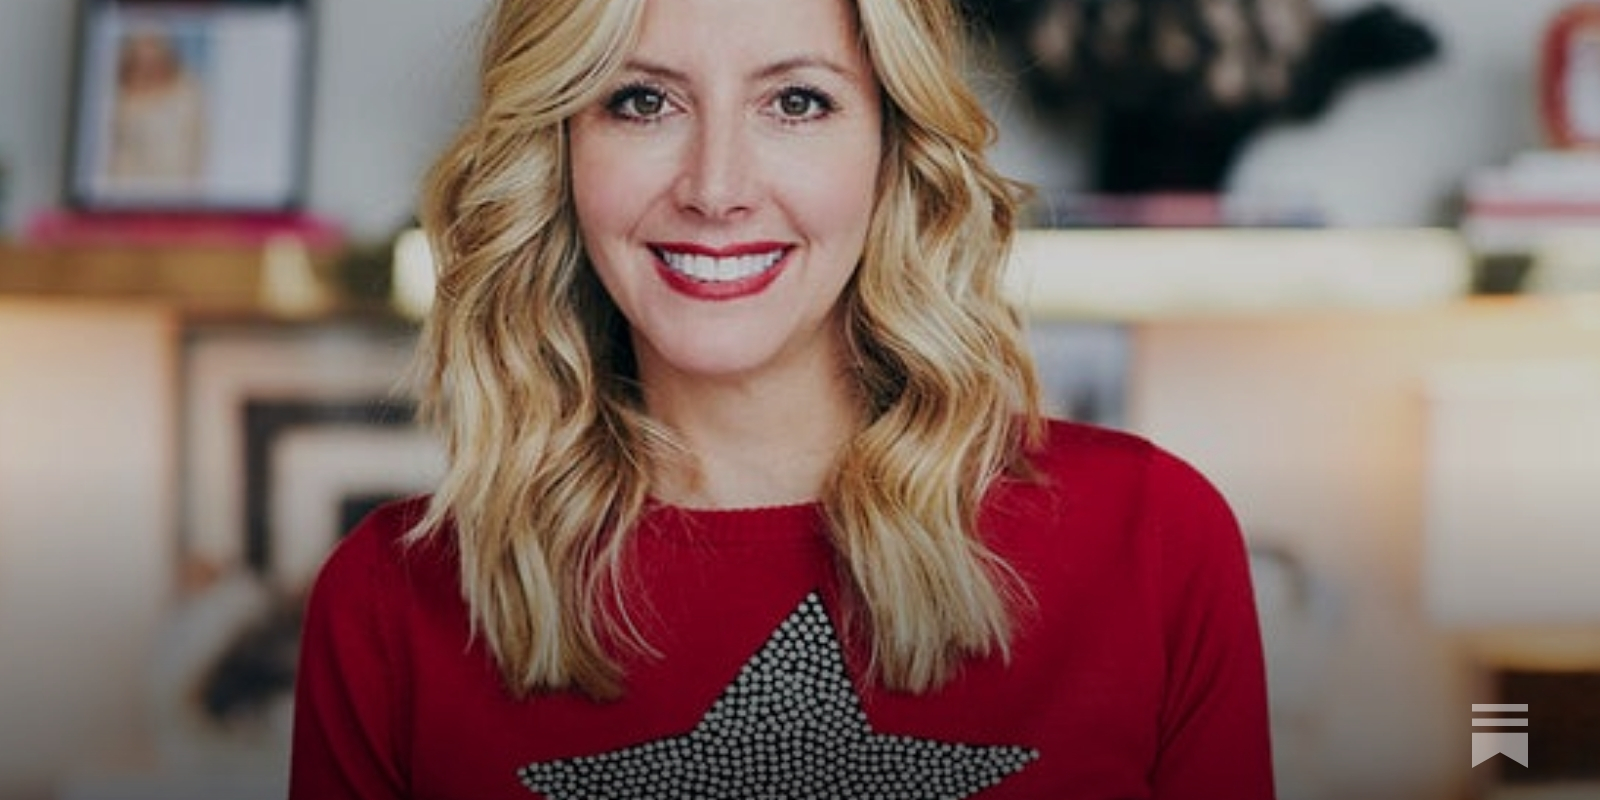 The Profile Dossier: Sara Blakely, the Self-Made Billionaire